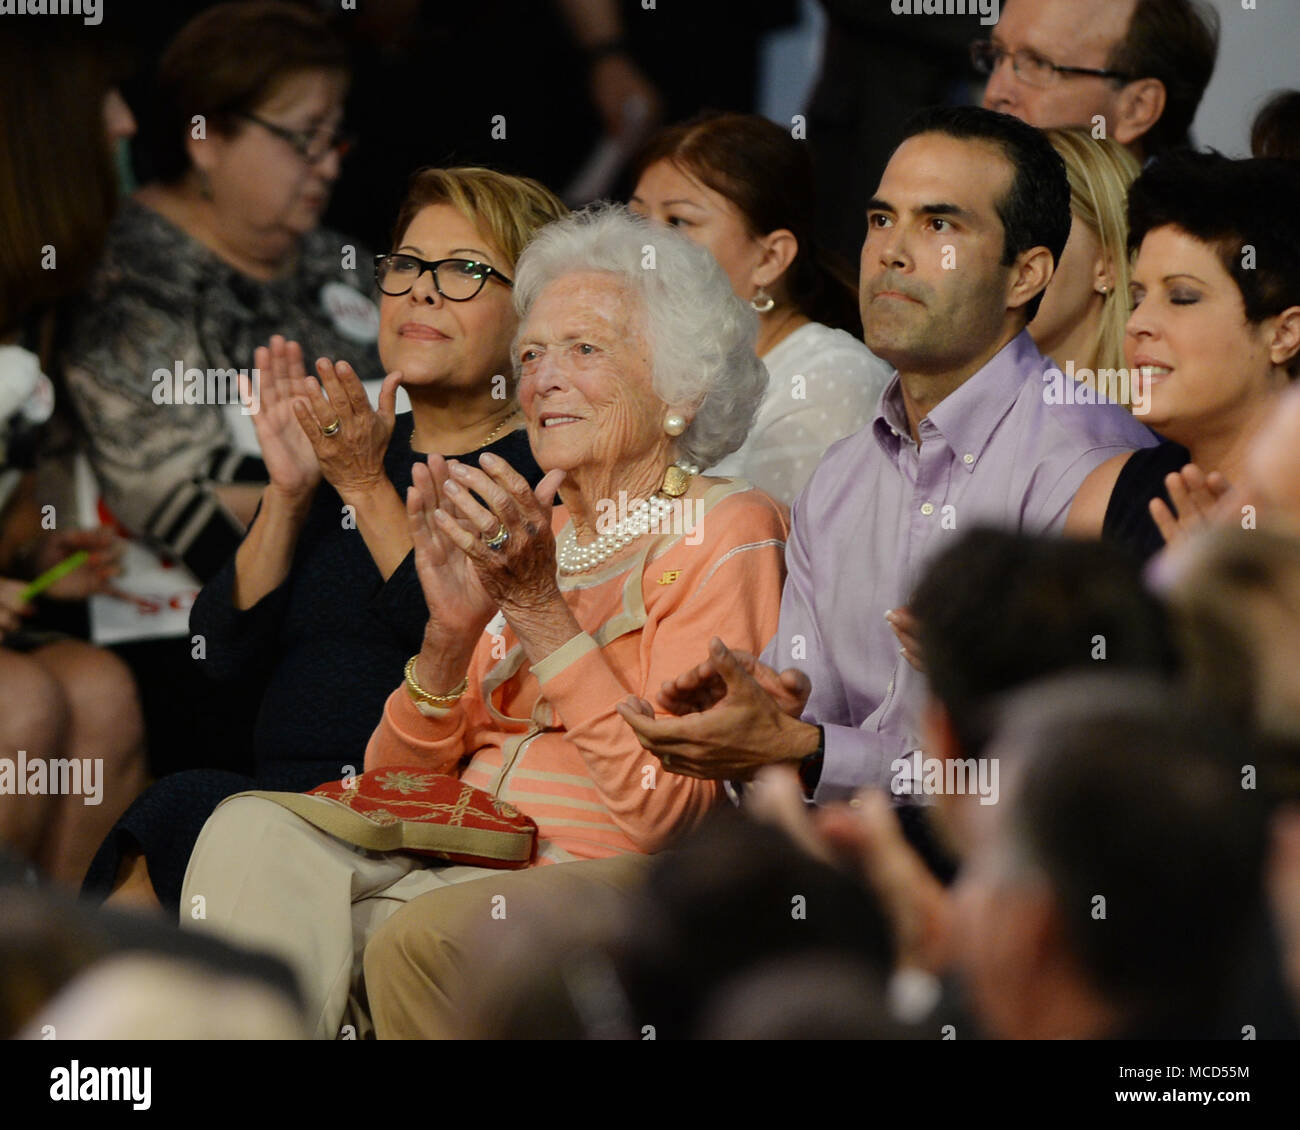 Miami, FL, USA. 15th June, 2018. Columba Bush, Barbara Bush and George P. Bush as Former Florida Governor Jeb Bush announces his candidacy for the 2016 Republican Presidential nomination during a rally at Miami Dade College on June 15, 2015 in Miami, Florida. Credit: Mpi04/Media Punch/Alamy Live News Stock Photo